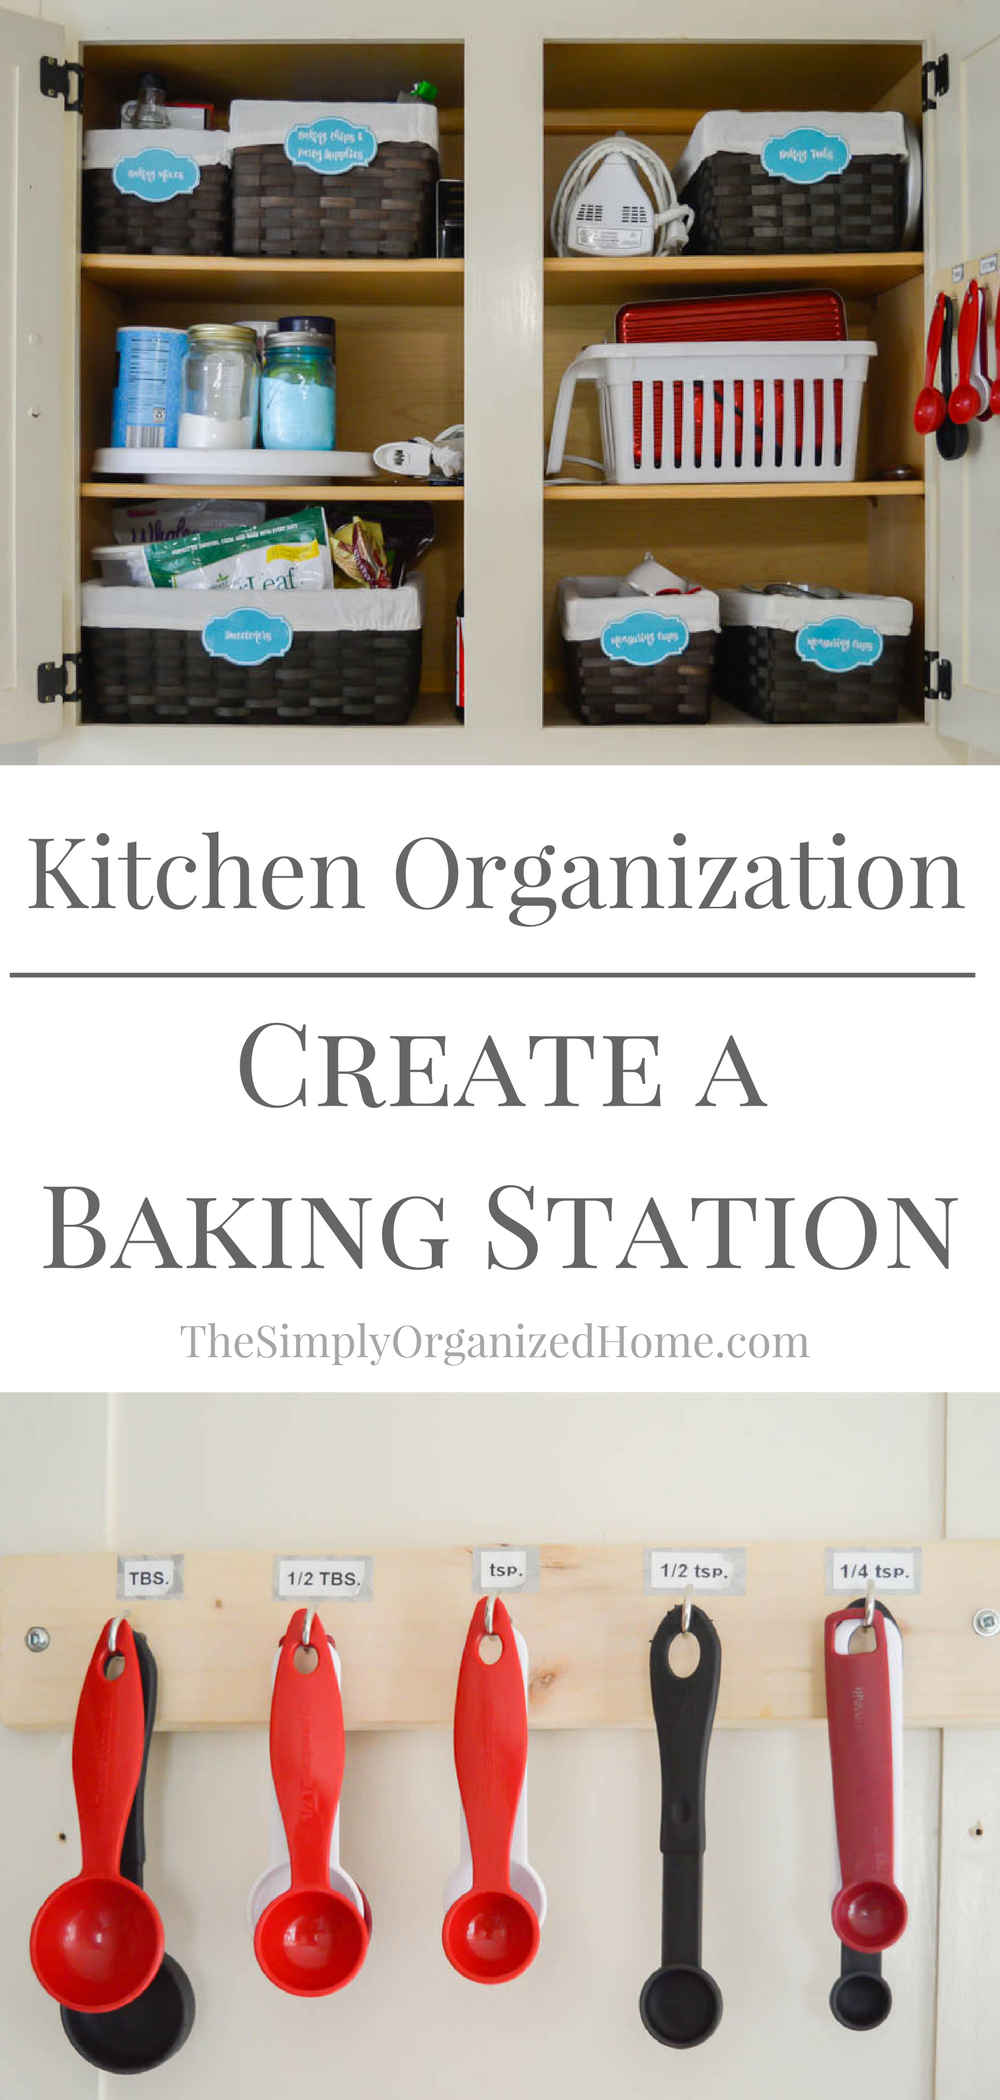 https://www.thesimplyorganizedhome.com/wp-content/uploads/2017/02/Baking-Station.png